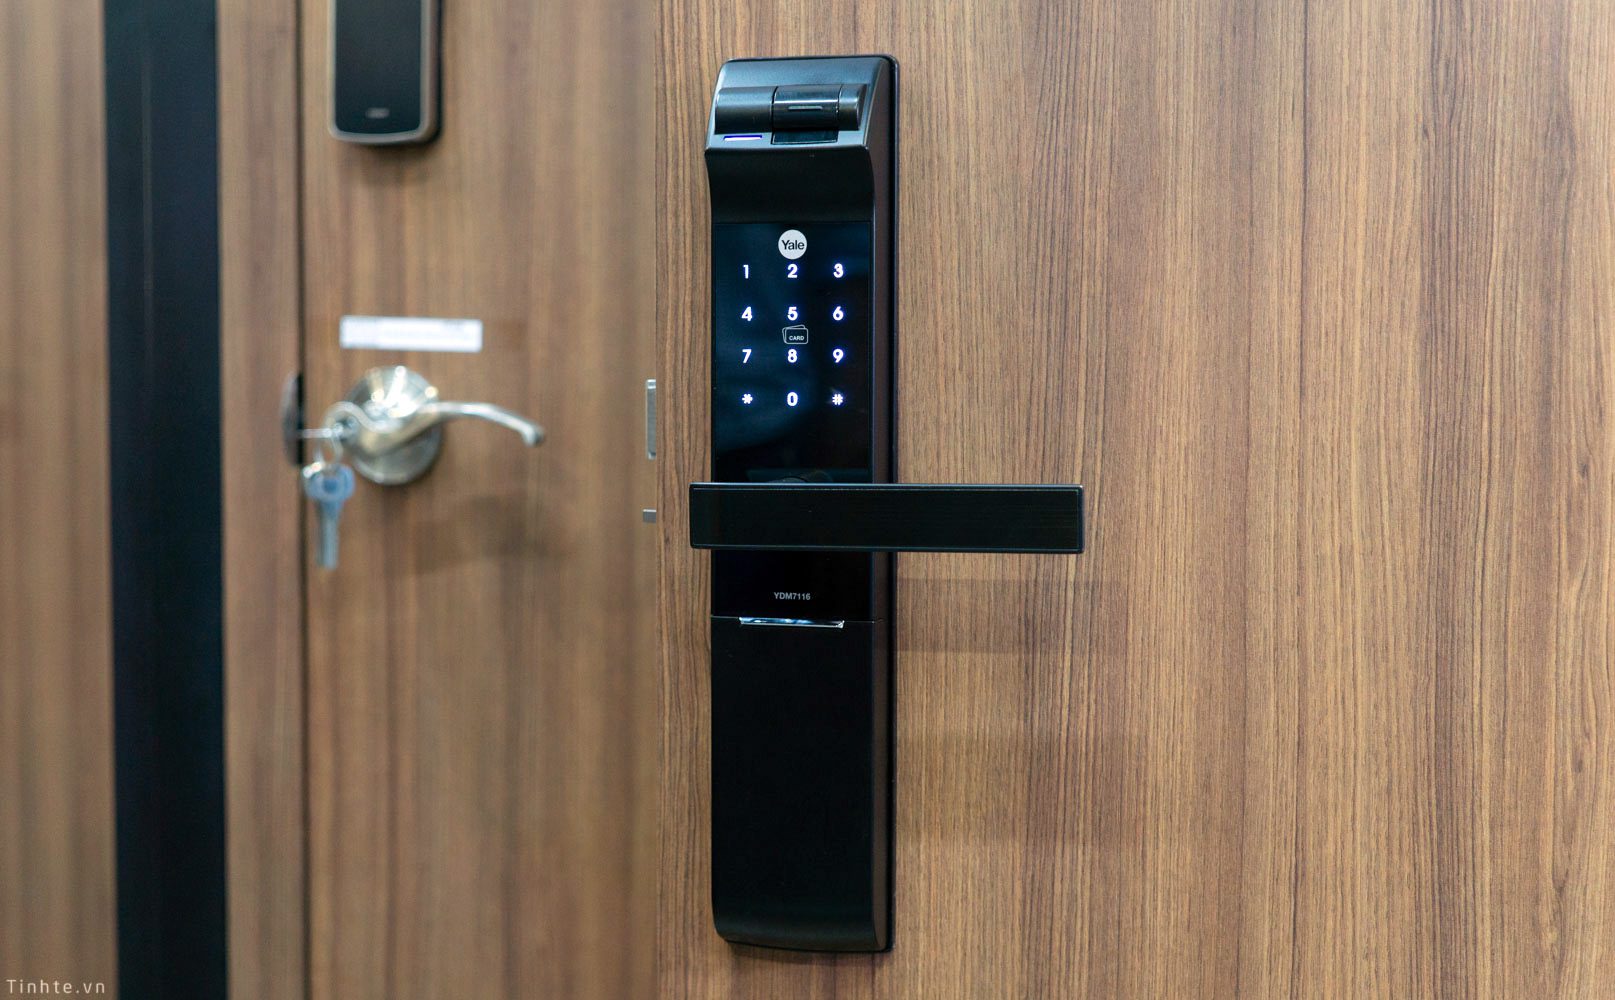 Yale fingerprint door locks bring your security to the next level. With its advanced features and sleek design, Yale fingerprint door lock is a must-have for all homeowners. Click to see the image and enhance your security system today!